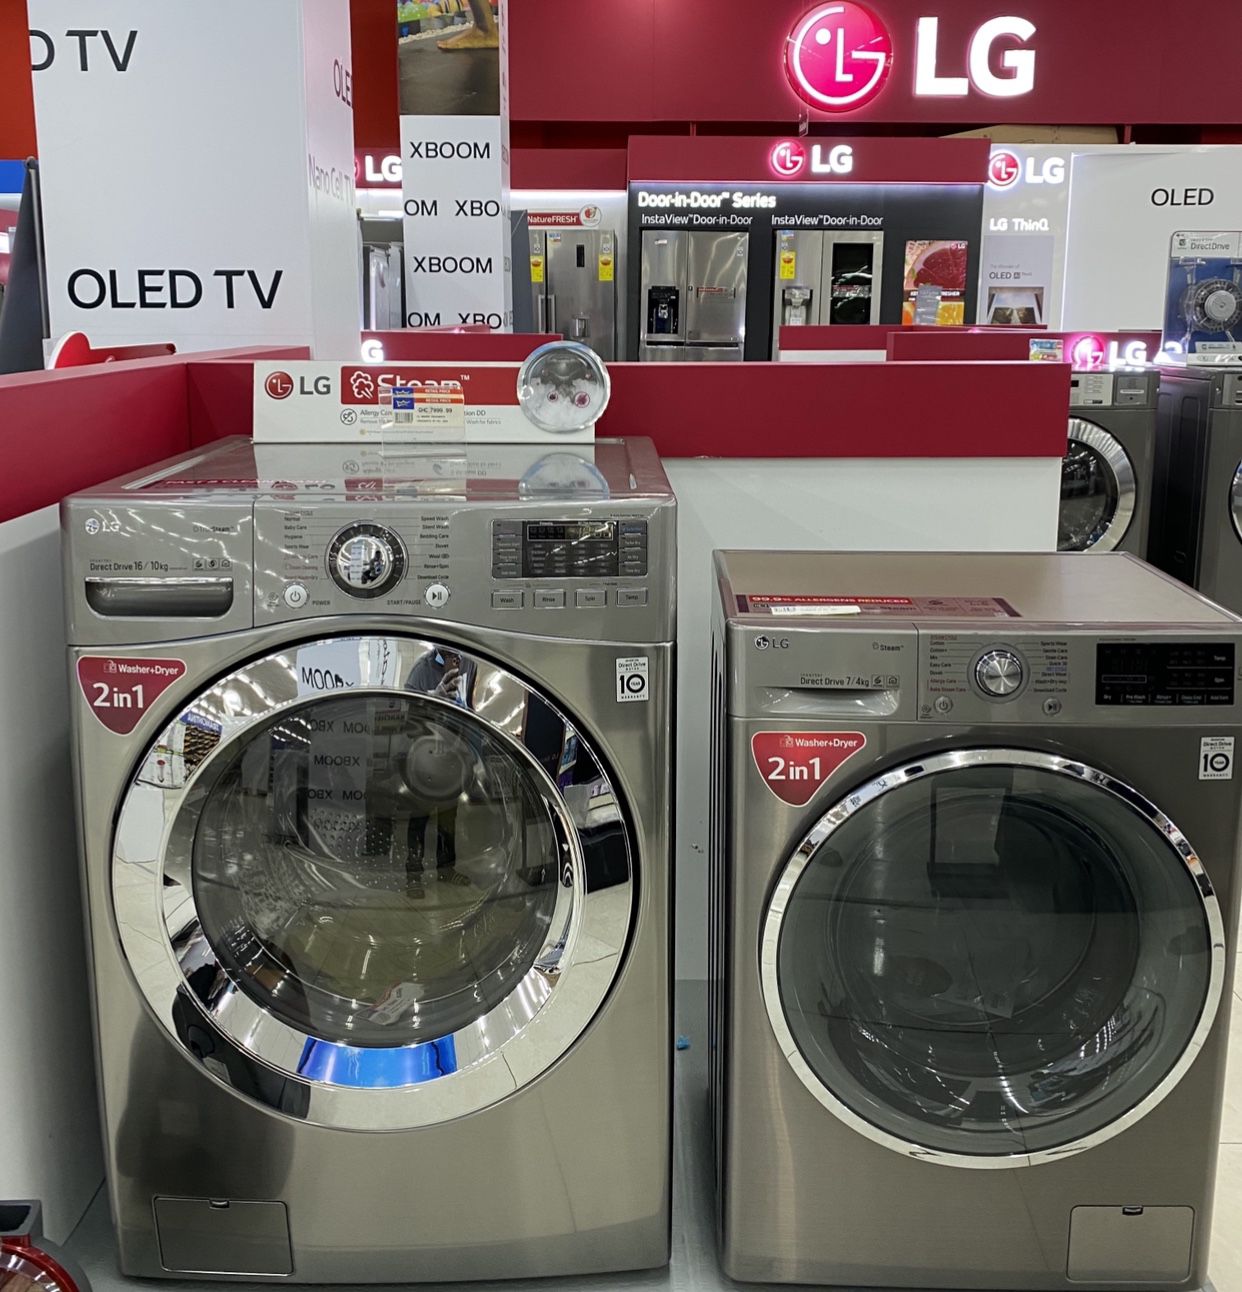 Brand new washer and dryer; both electric and gas set available for sale.